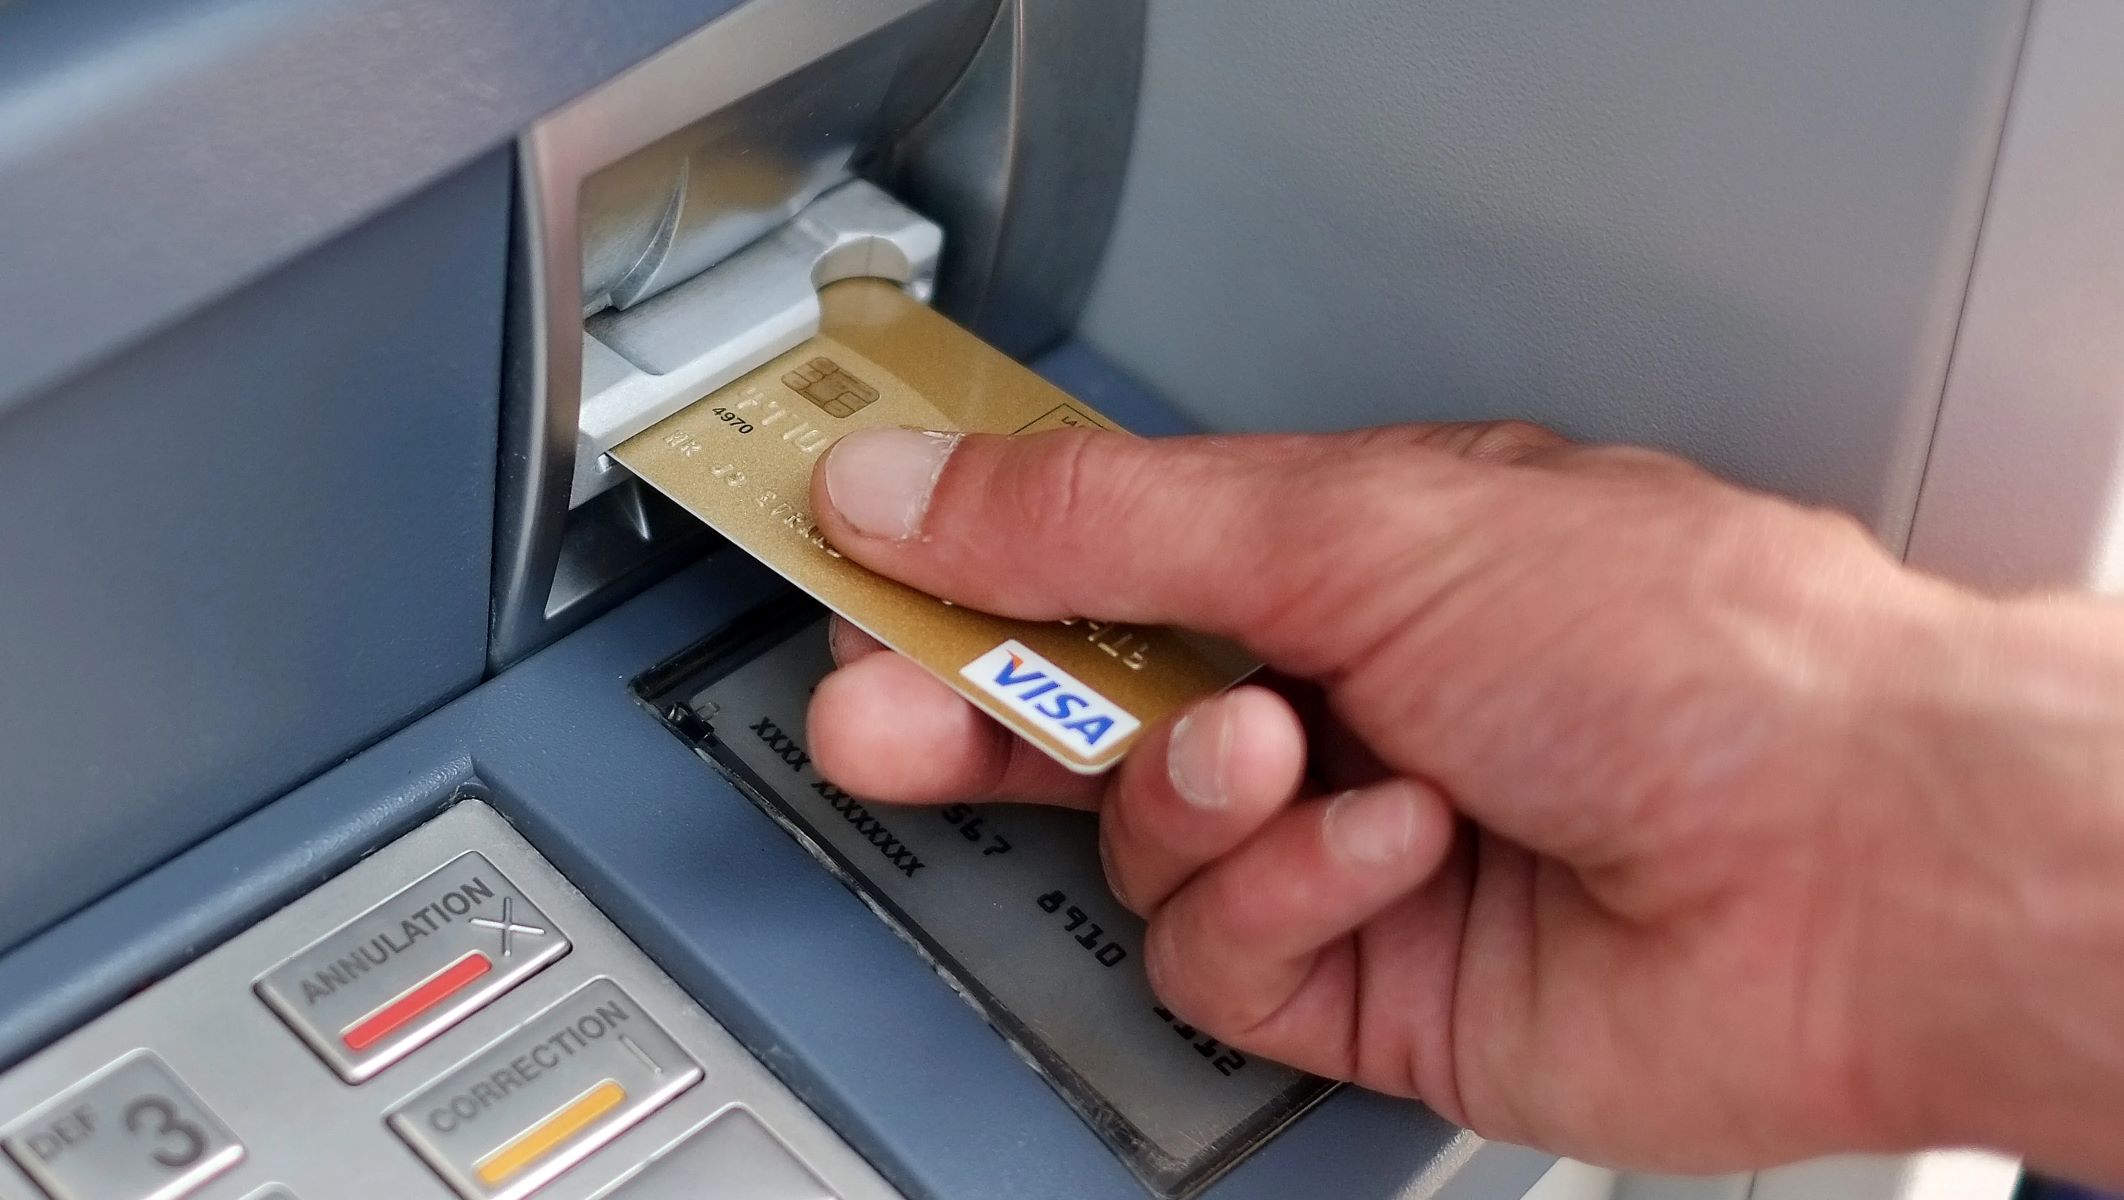 How To Make A Credit Card Skimmer